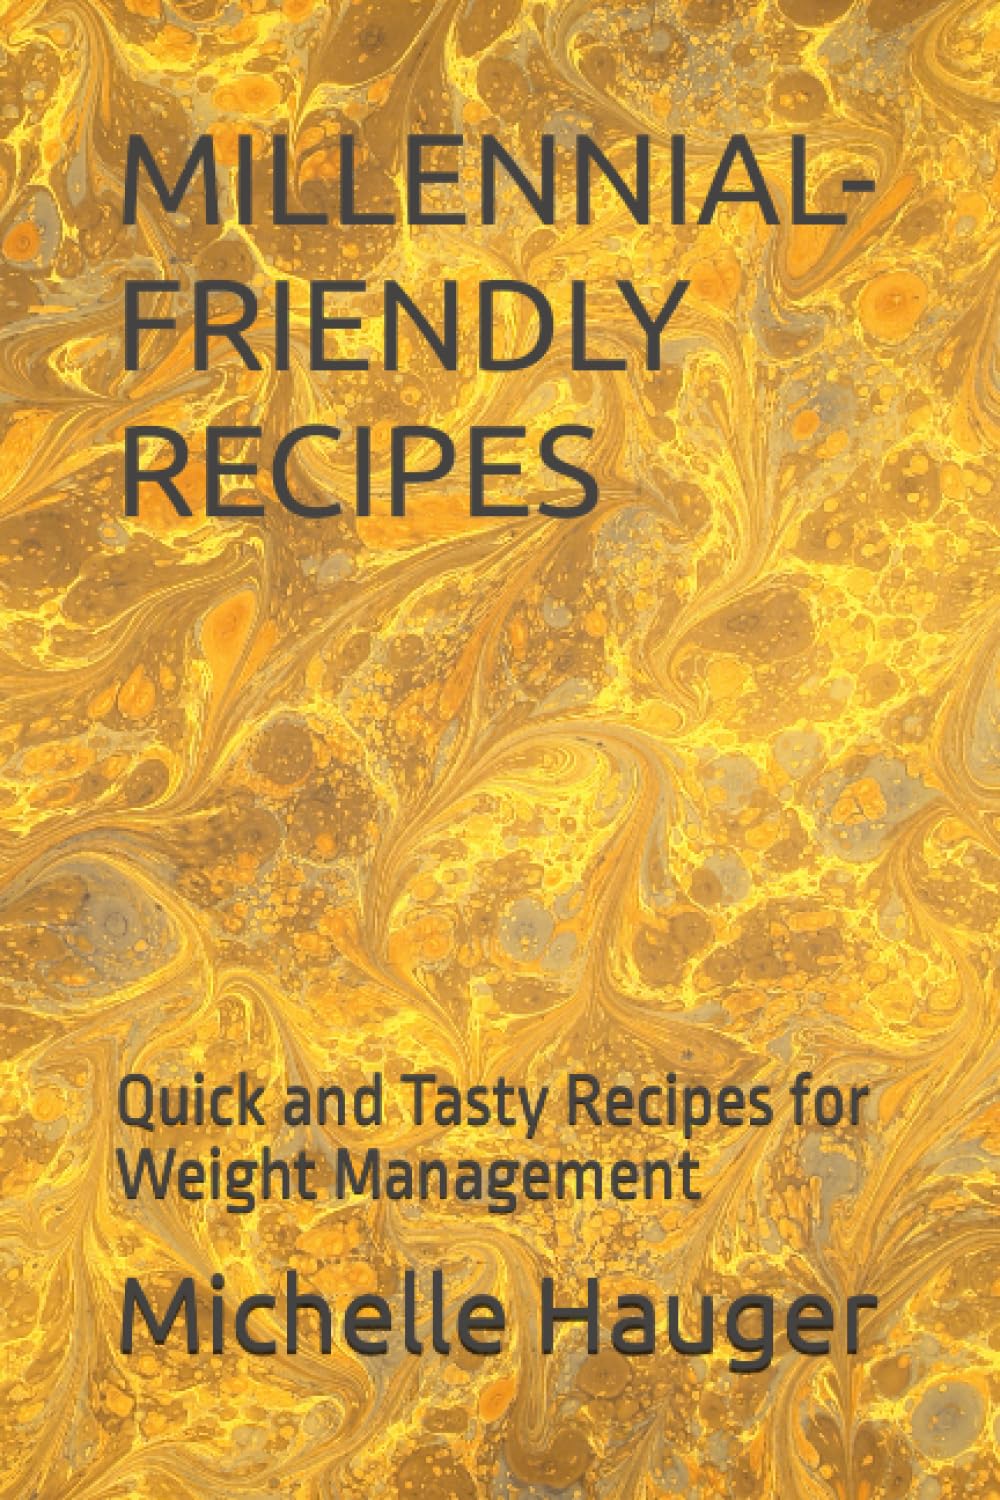 MILLENNIAL-FRIENDLY RECIPES: Quick and Tasty Recipes for Weight Management